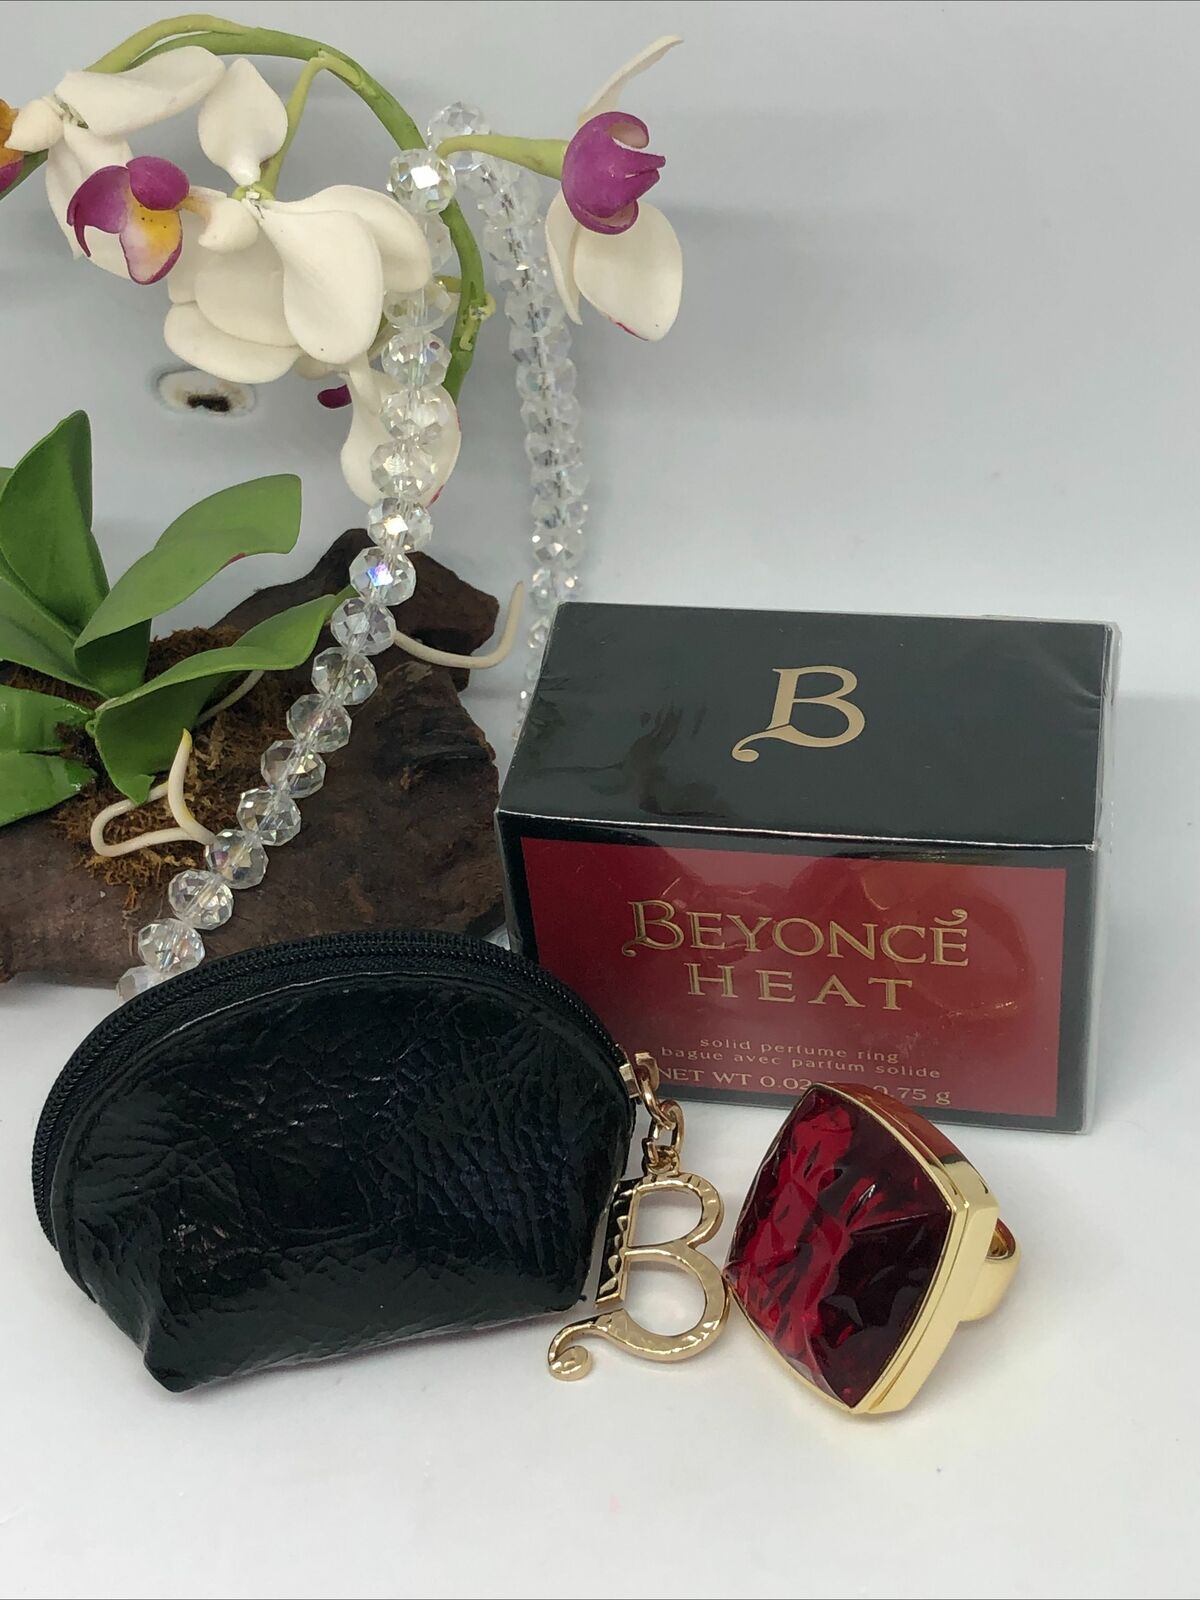 Beyonce Heat Solid Perfume Ring - .02 oz - New in Sealed Box